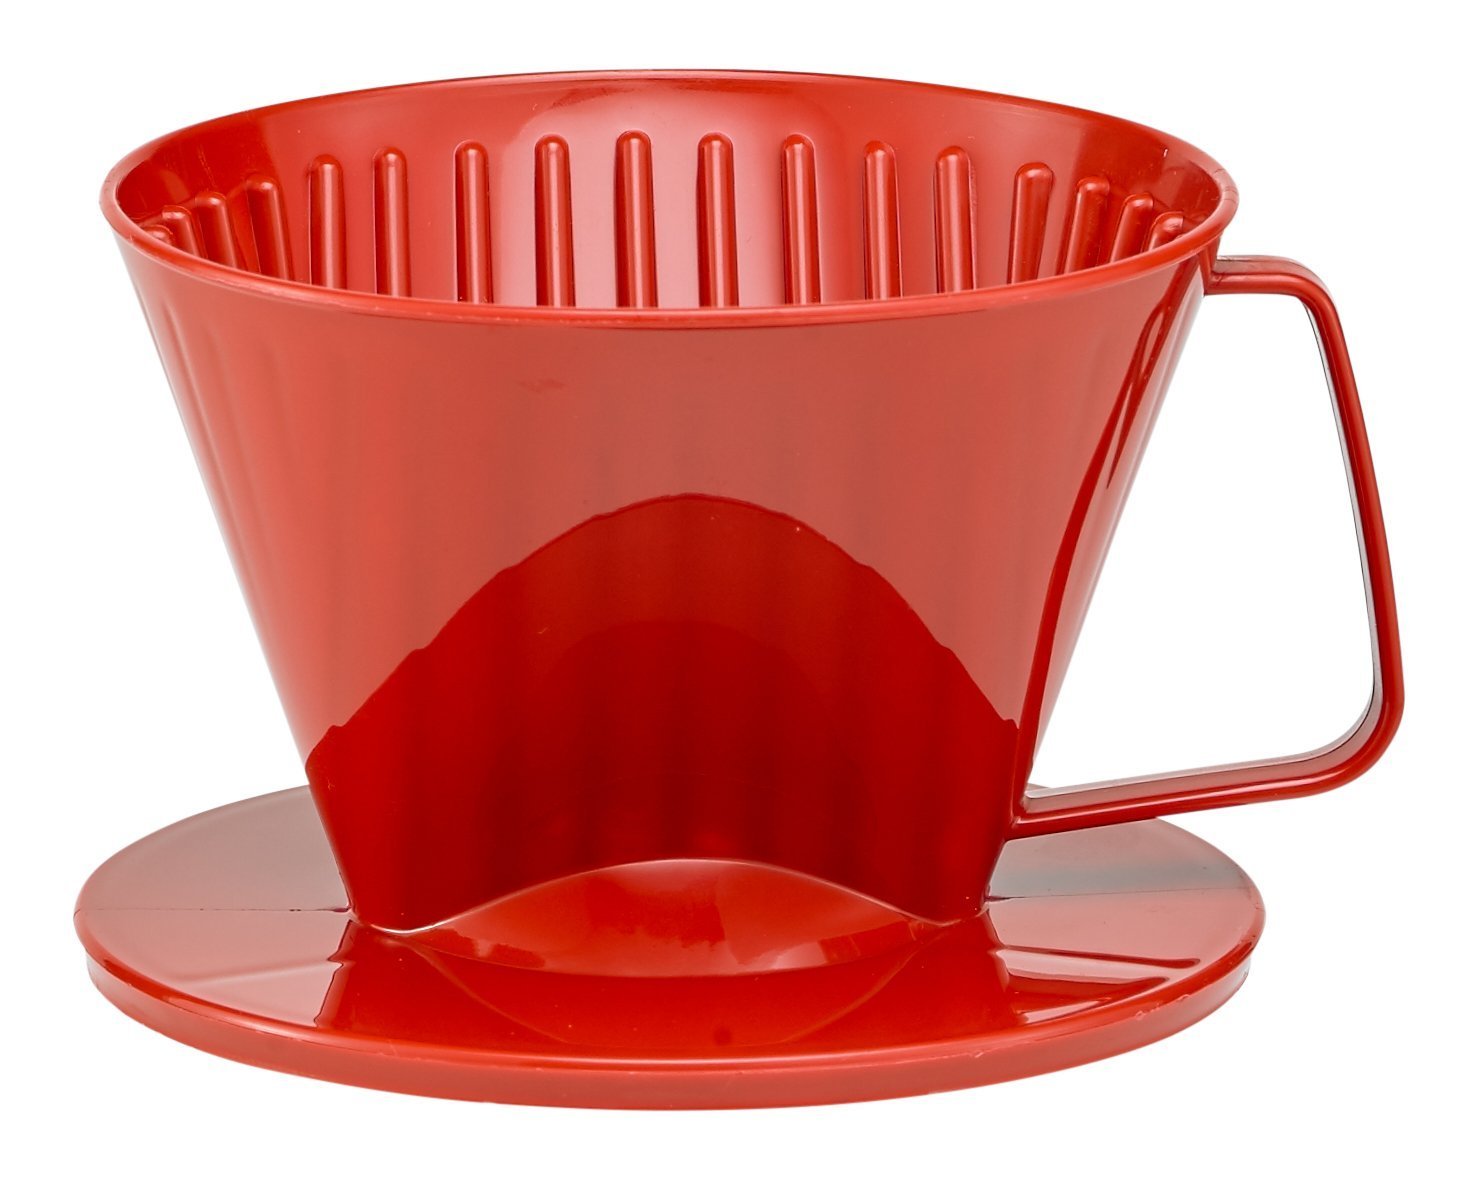 pour over plastic coffee filter number 1 size red